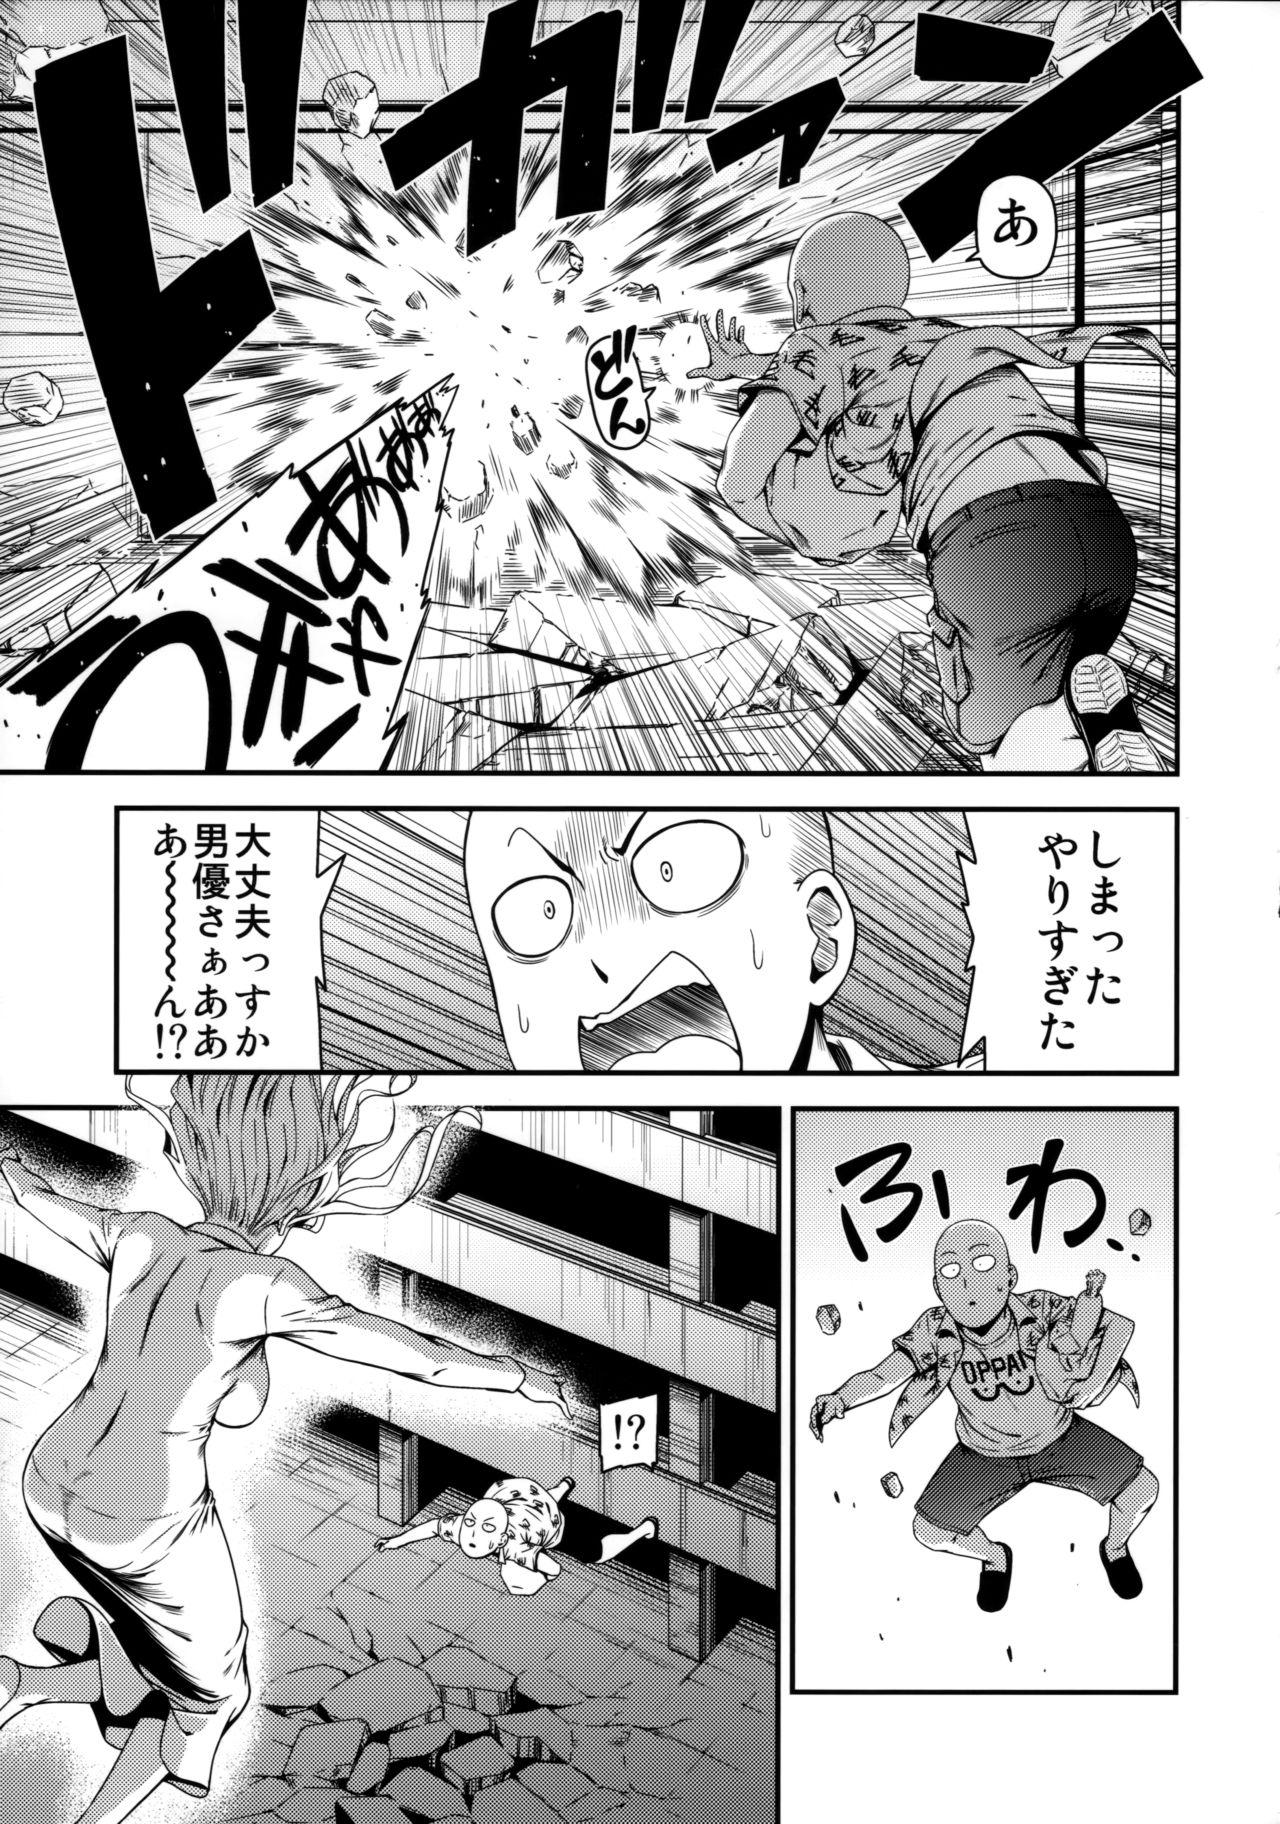 Esposa ONE-HURRICANE 3.5 - One punch man Salope - Page 10